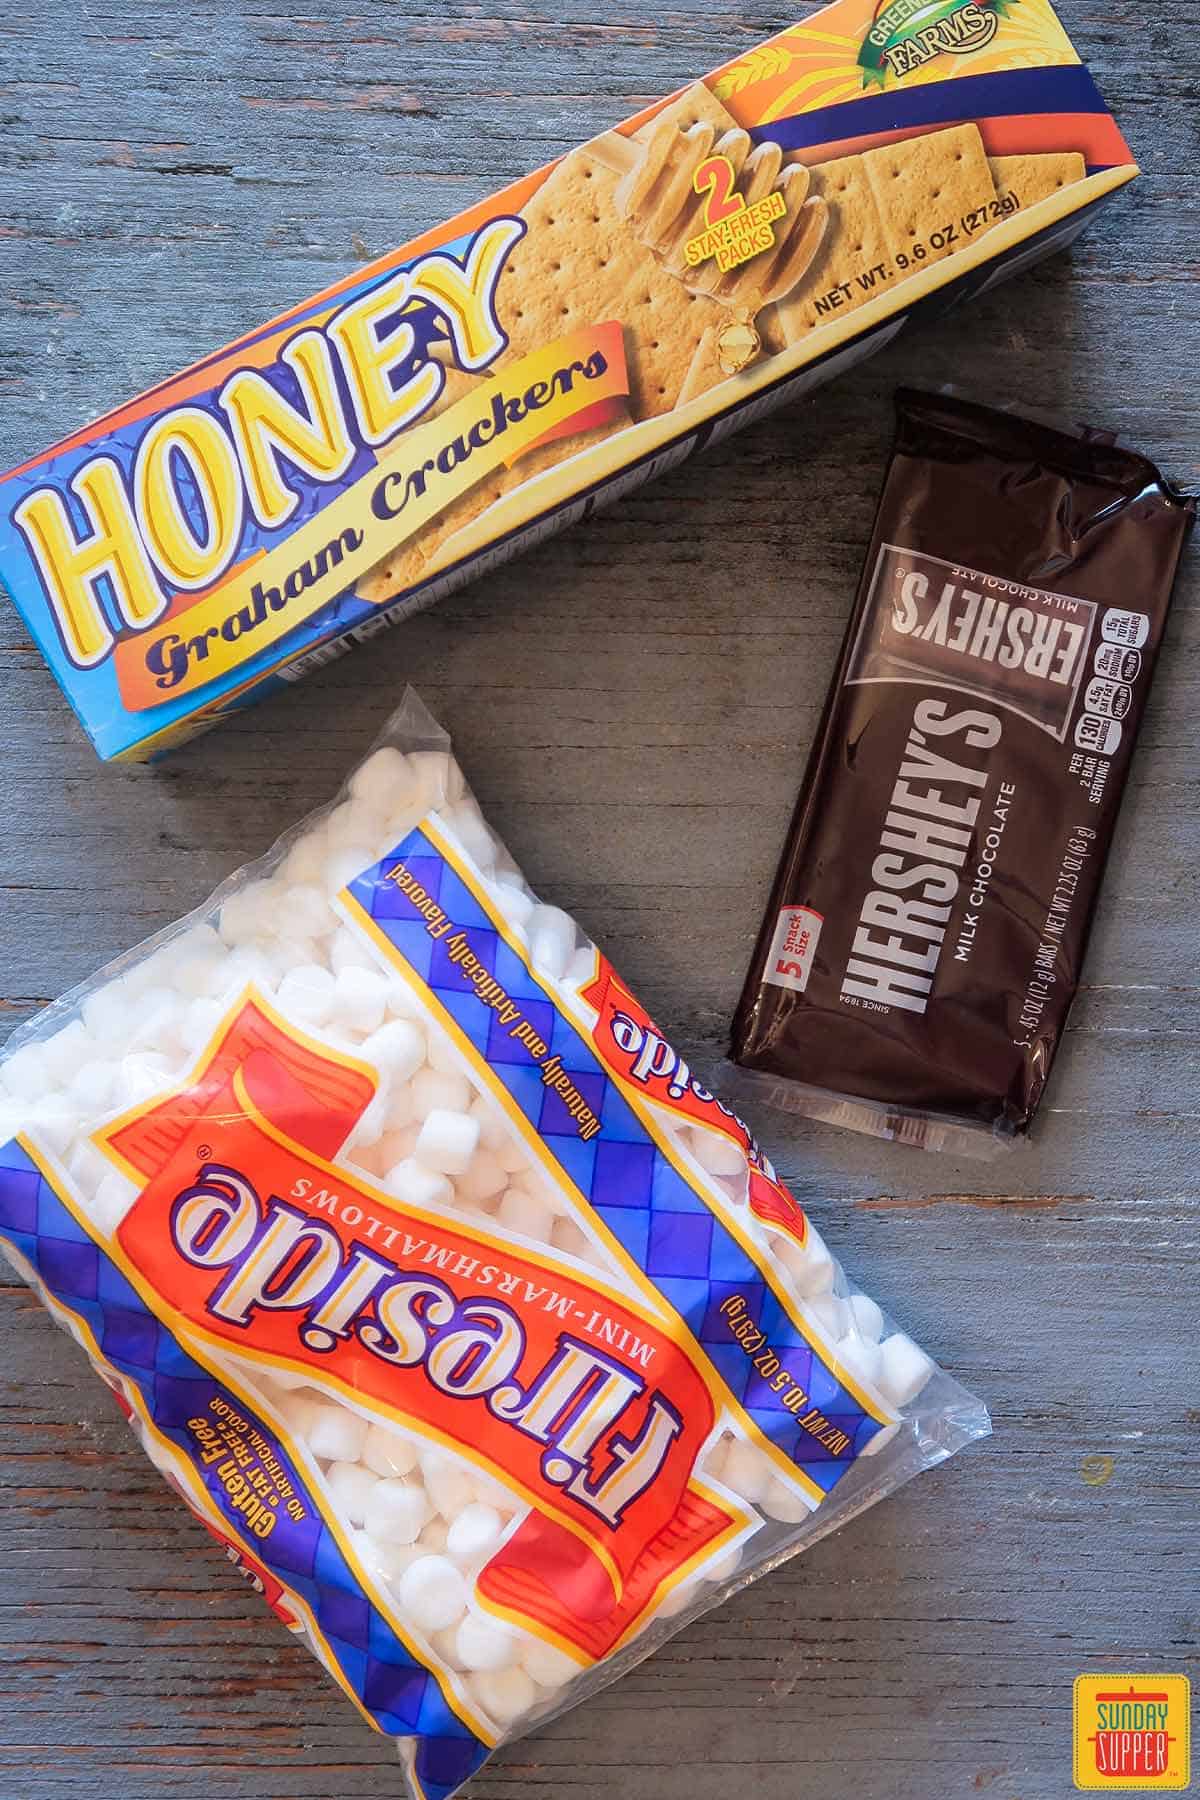 Ingredients to make s'mores: honey graham crackers, mini marshmallows, and a chocolate bar